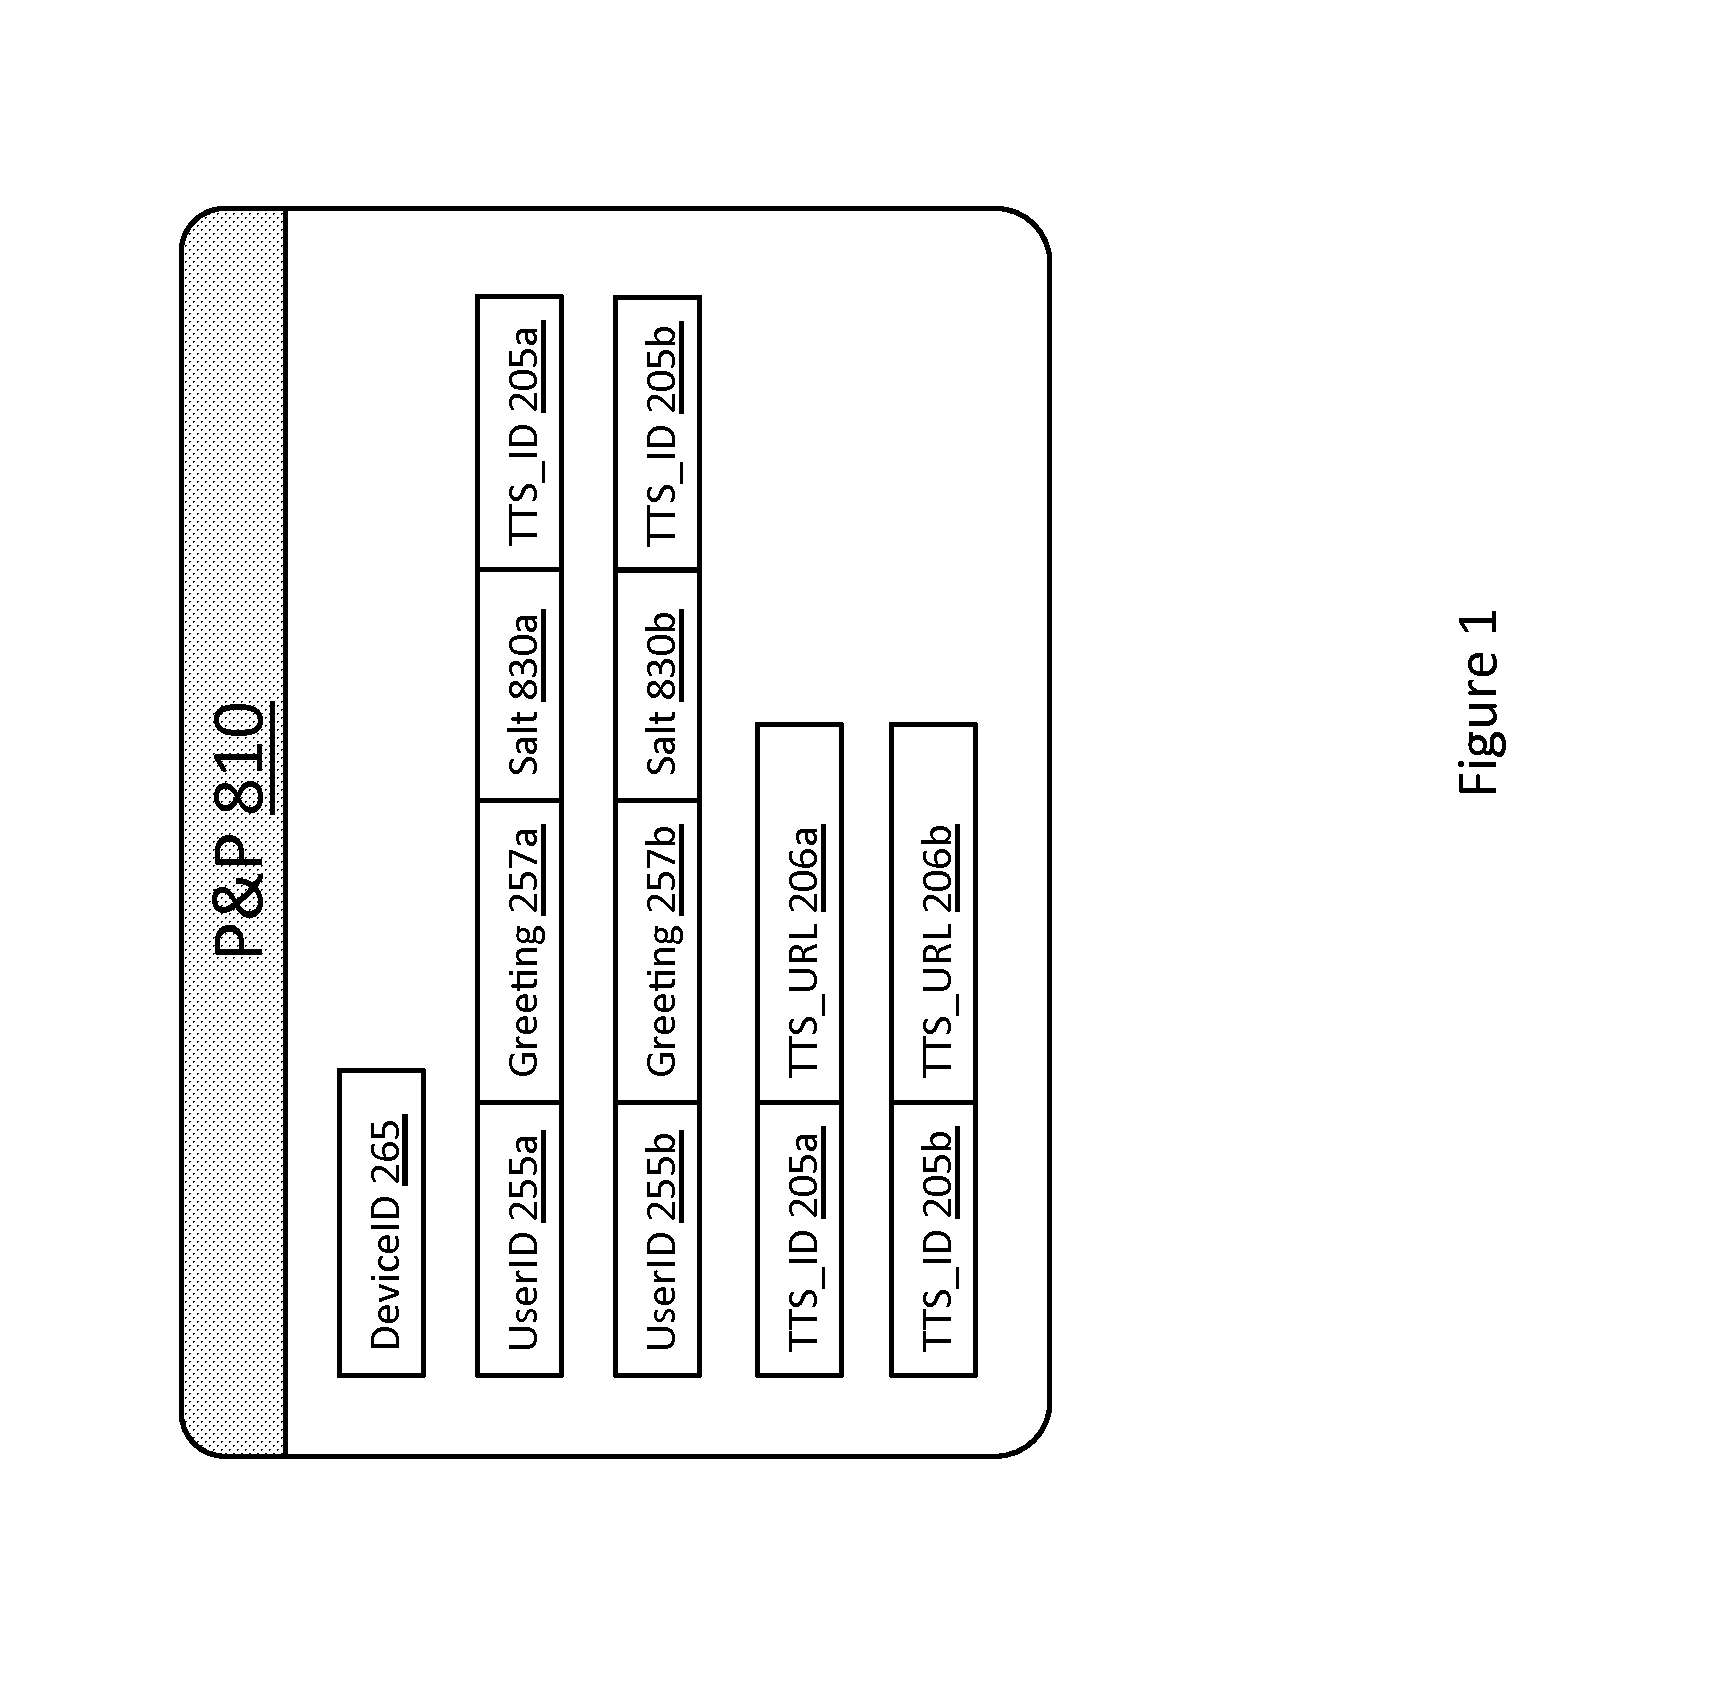 Methods and apparatus for brokering a transaction